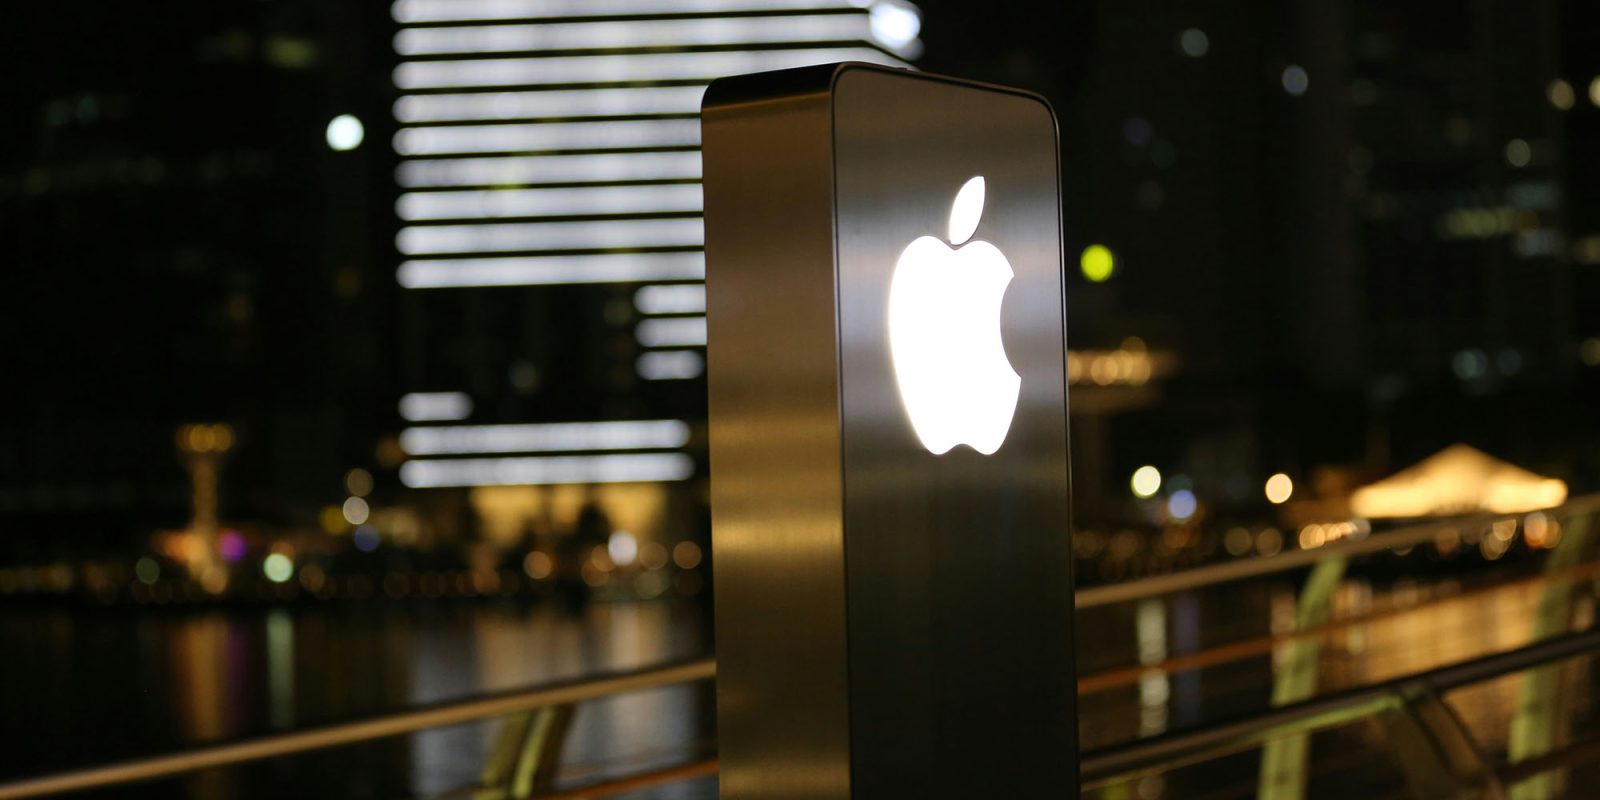 Next Apple antitrust battle looming | Photo shows glowing Apple logo outside a retail store